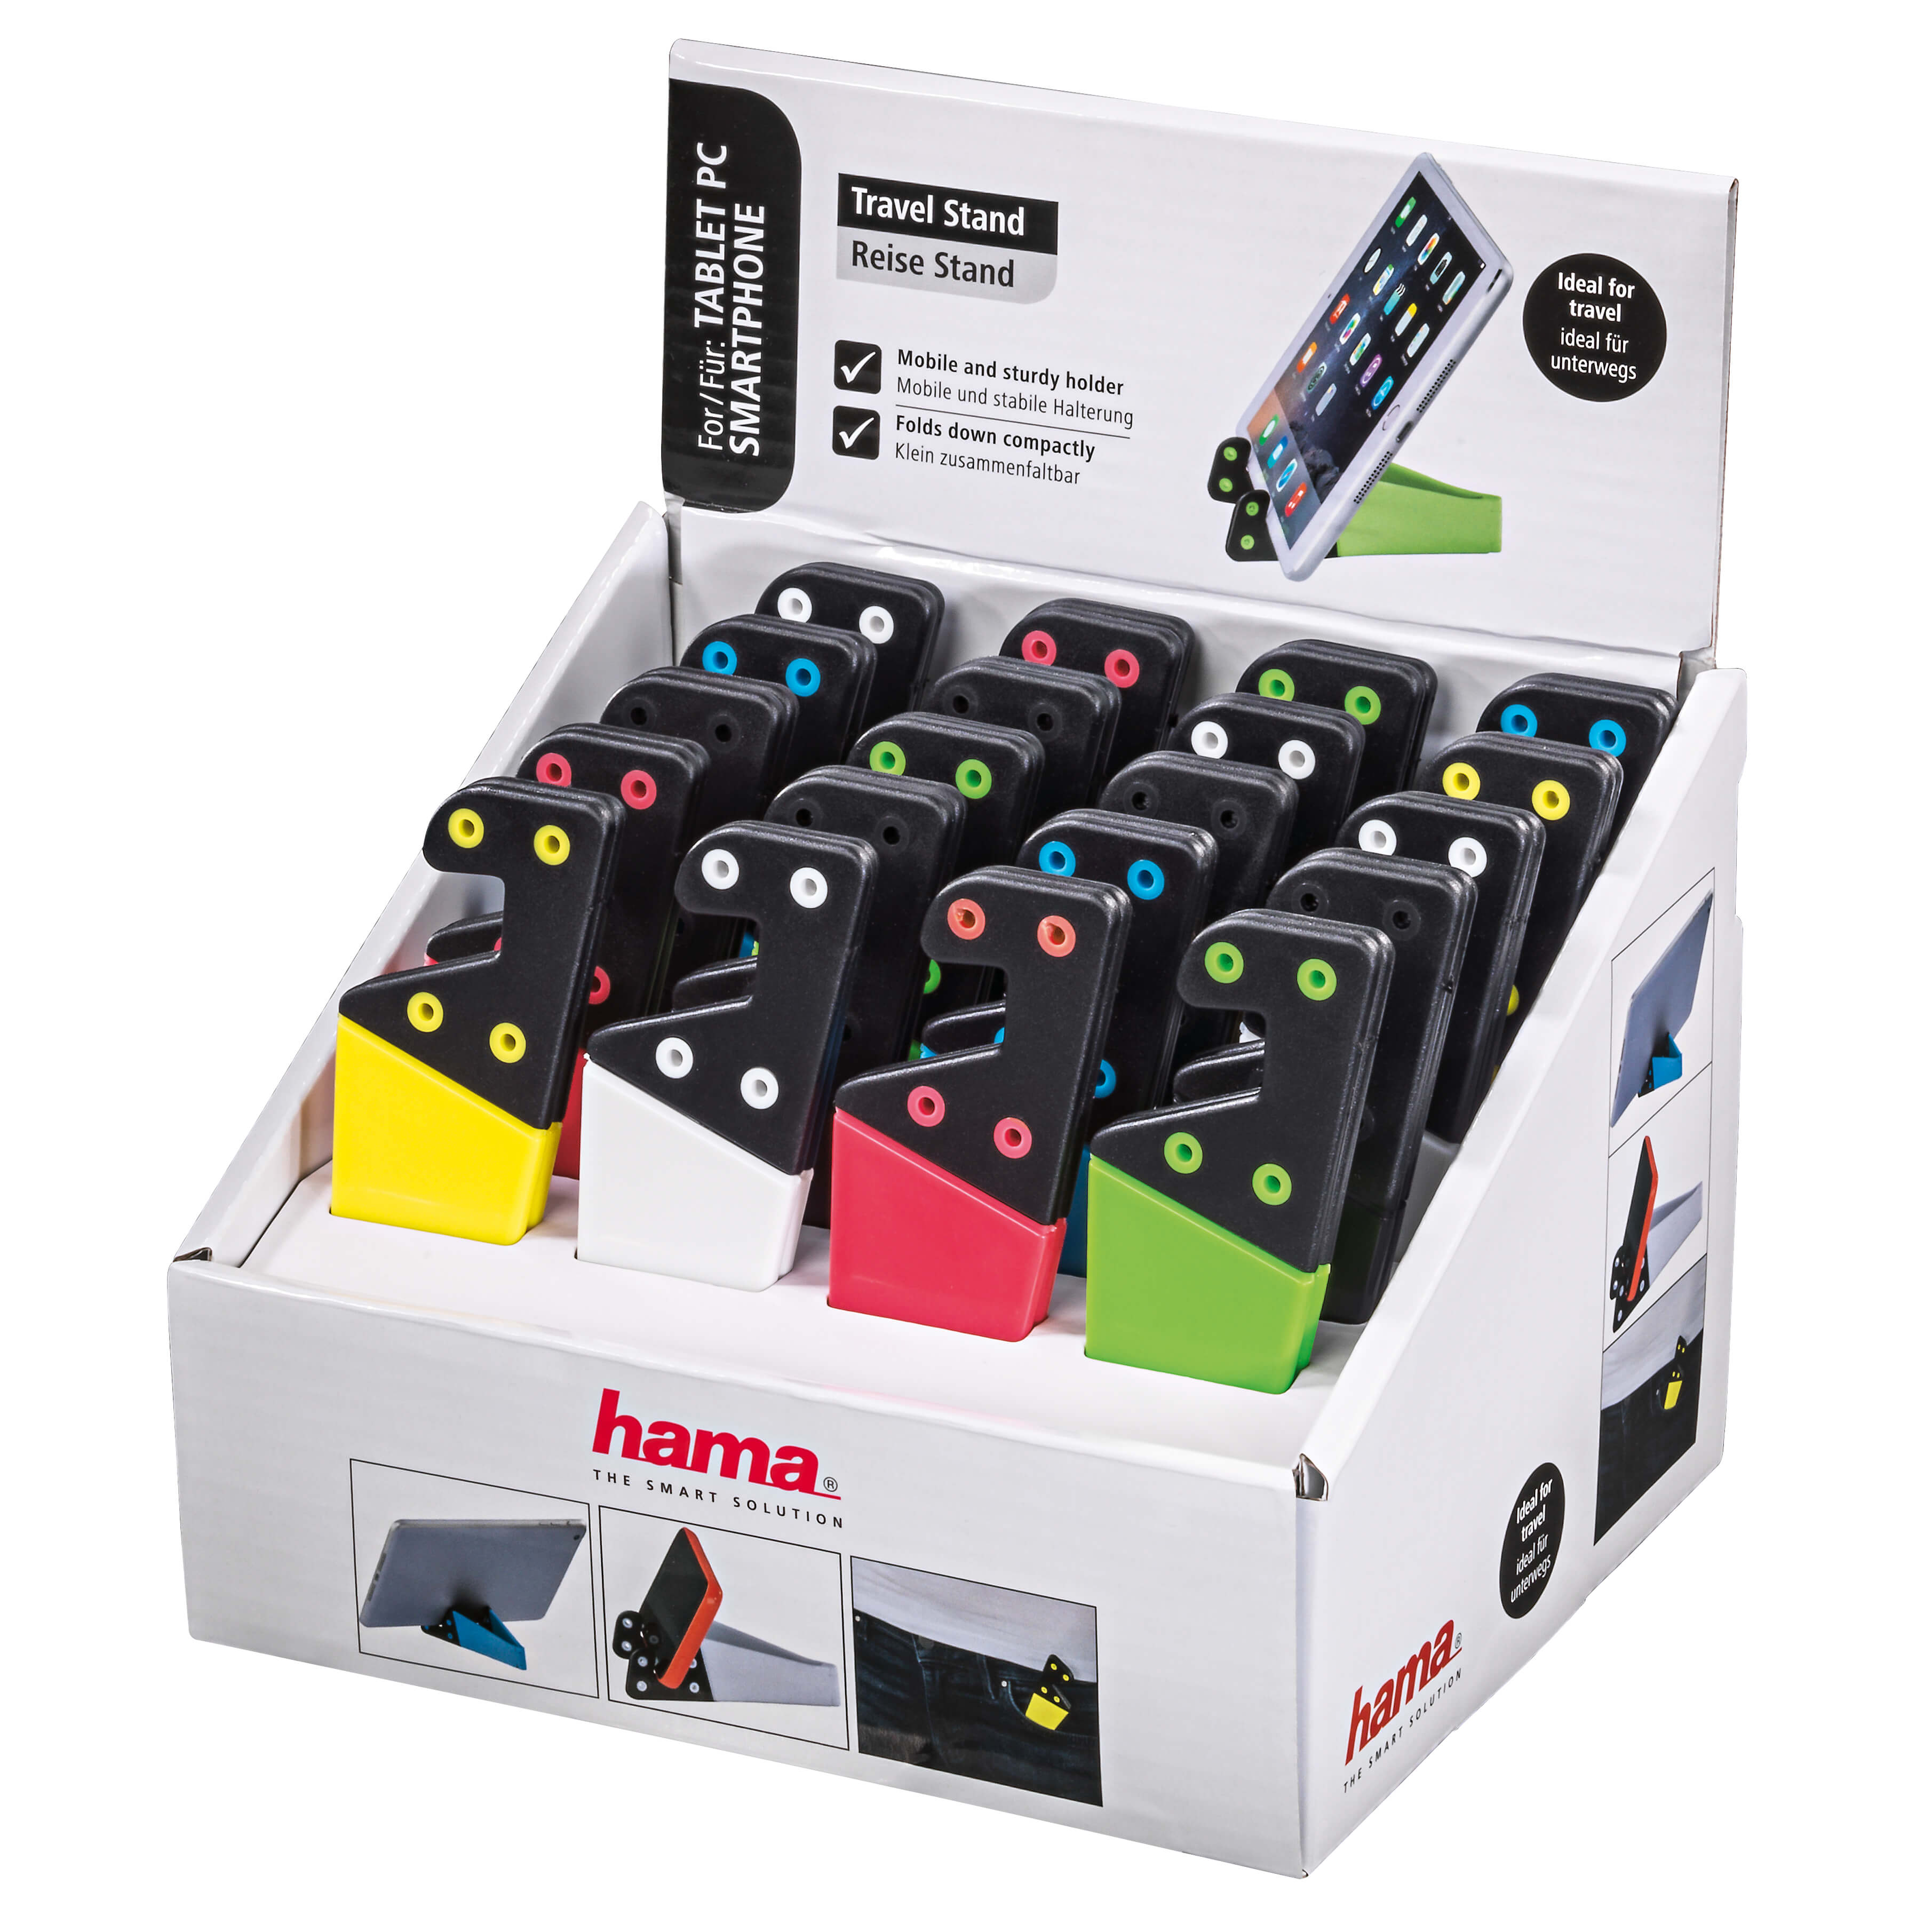 HAMA Tablet tablestand Display 20pack 